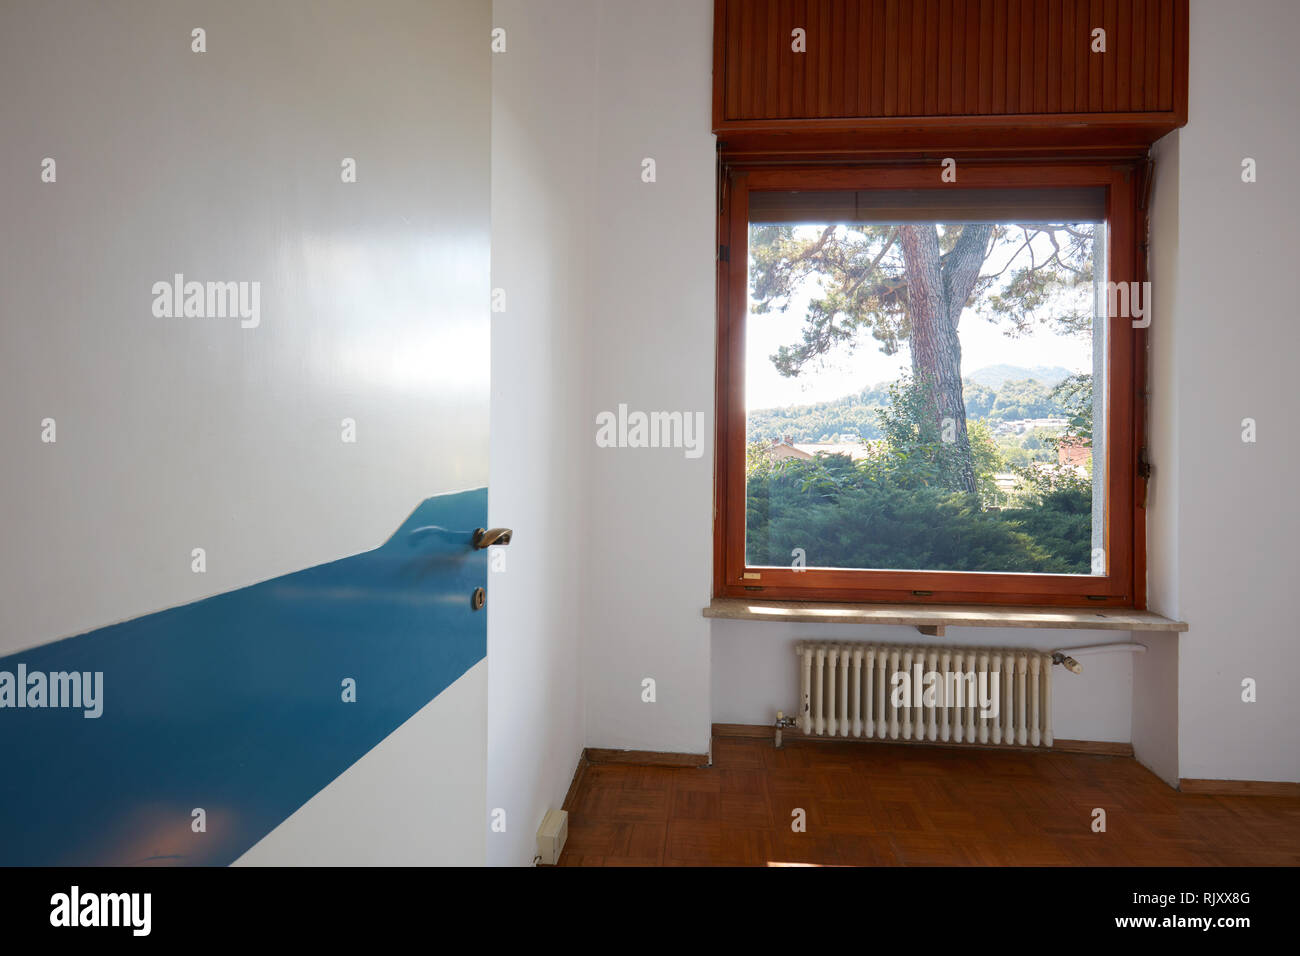 Old room, apartment interior in old house with garden Stock Photo